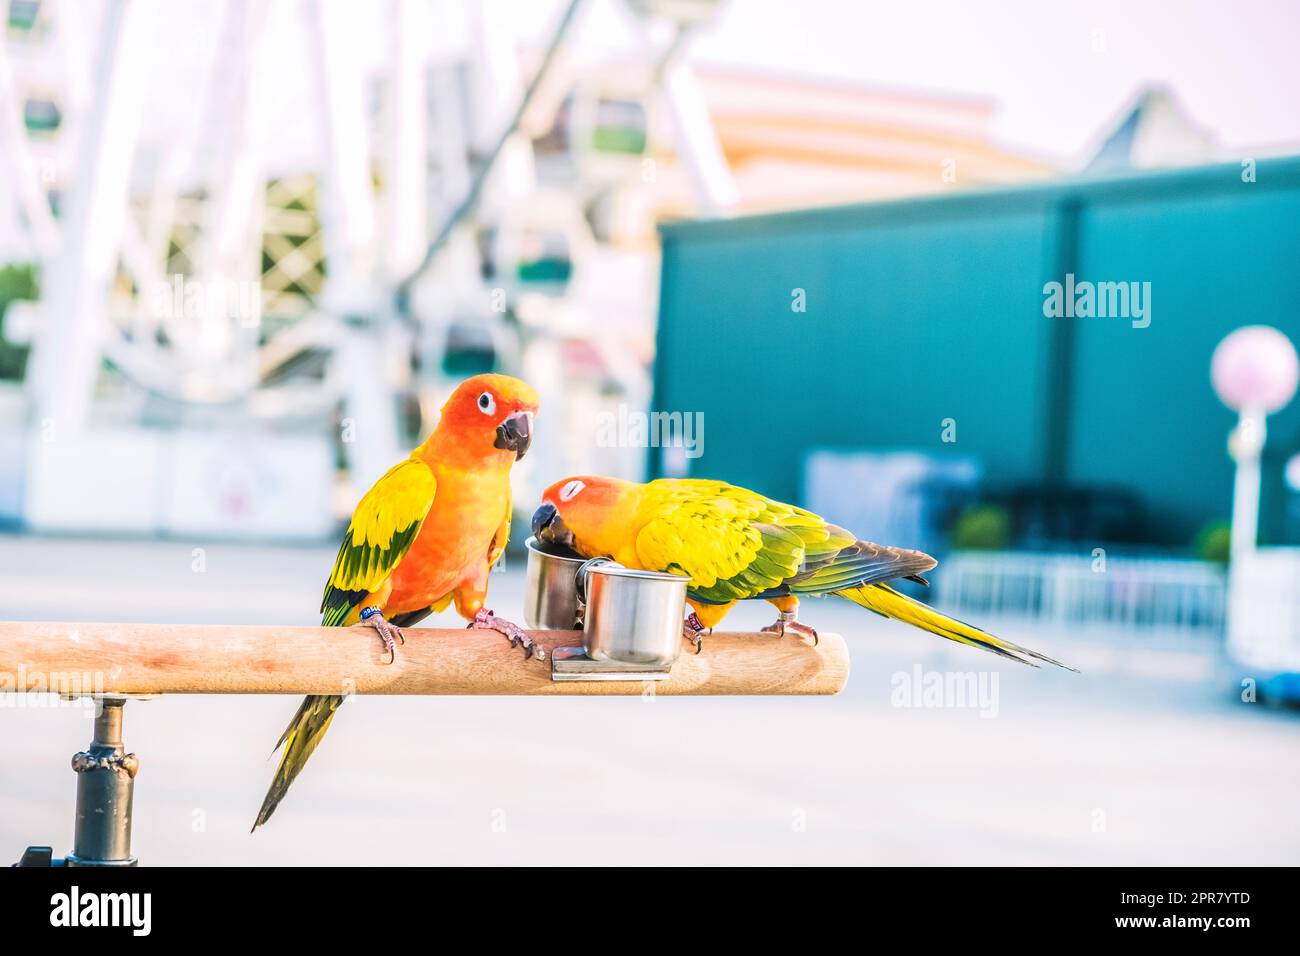 Sun conure parrot birds on wooden bar with blurred giant wheel on background Stock Photo